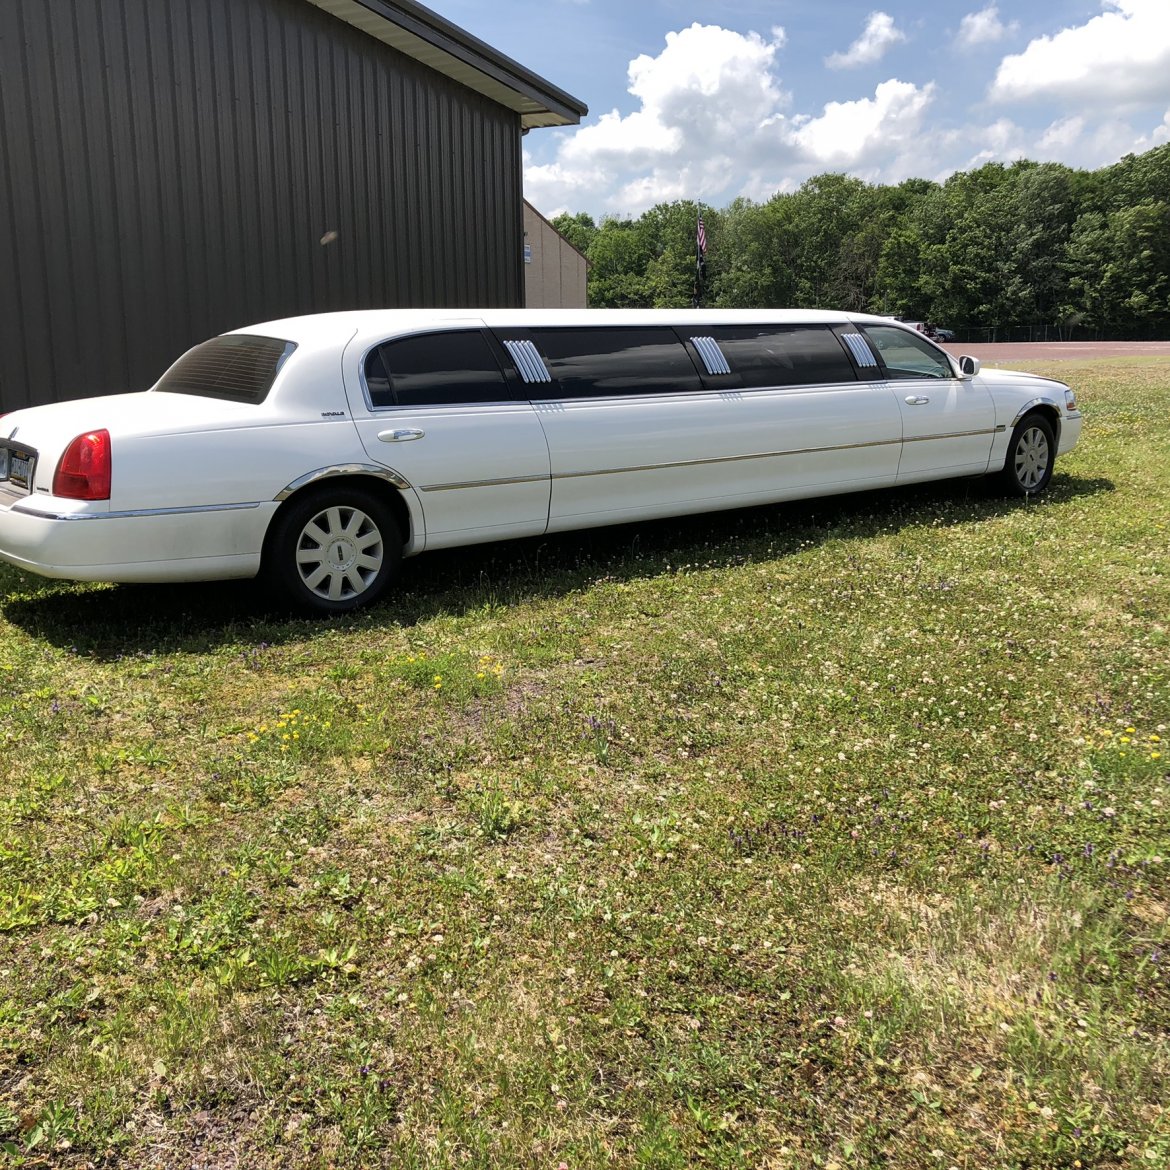 Limousine for sale: 2006 Lincoln Town car 210&quot; by Royal coach works